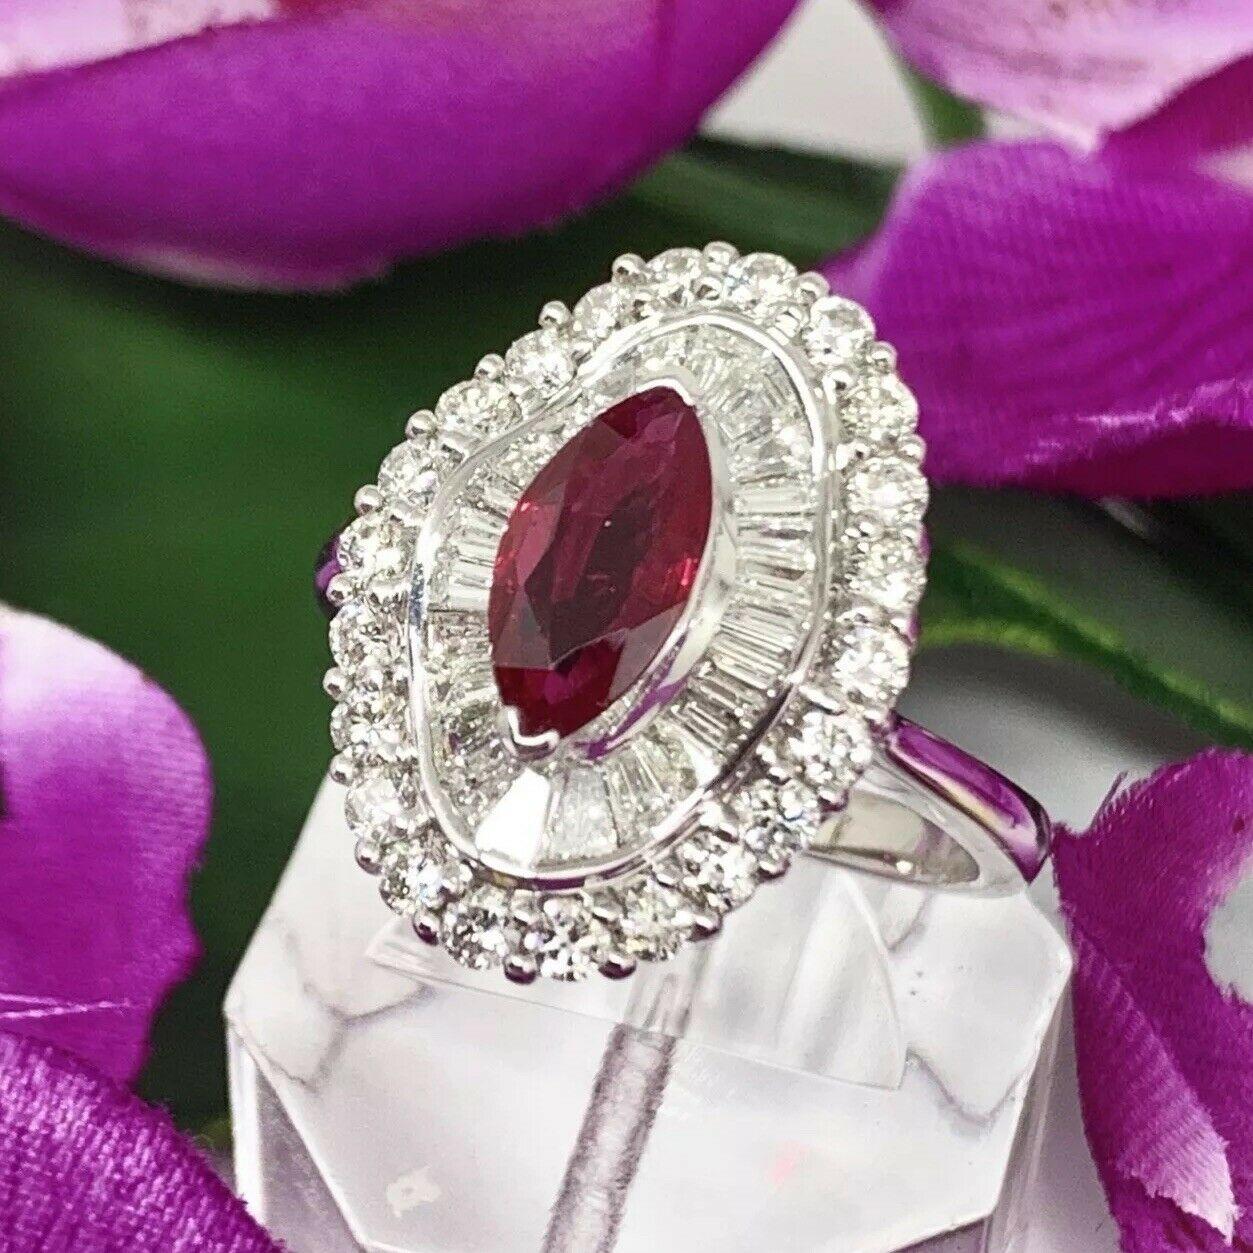 CERTIFIED $7,800 ESTATE LADIES FINELY FACETED QUALITY RUBY AND DIAMOND 18 KT RING 3.77 TOTAL CT total weight

This is a One of a Kind Unique Custom Made Glamorous Piece of Jewelry!!

Nothing says, “I Love ❤️ you” more than Diamonds and Pearls.